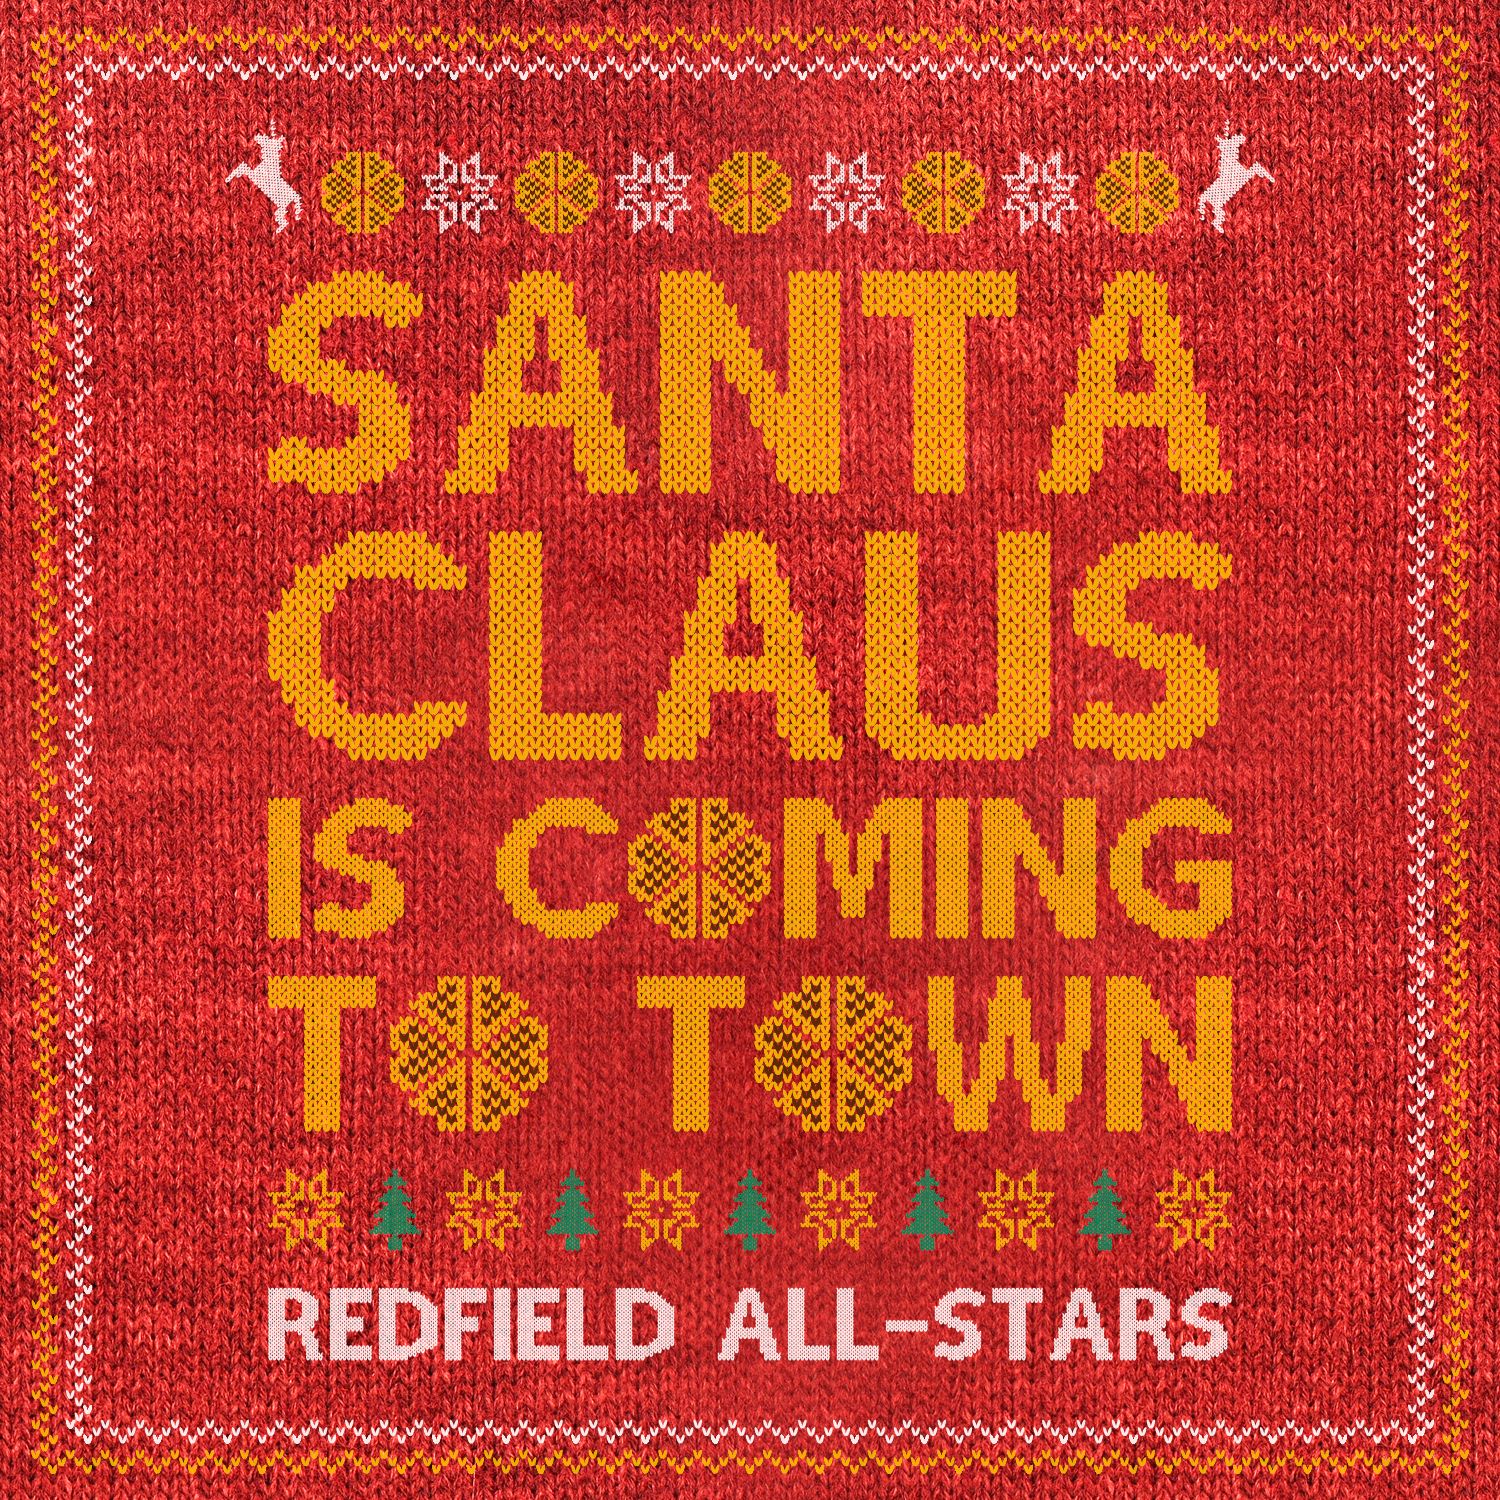 Eskimo Callboy, Any Given Day uvm: Redfield All-Stars zeigen 'Santa Claus Is Coming To Town'-Clip